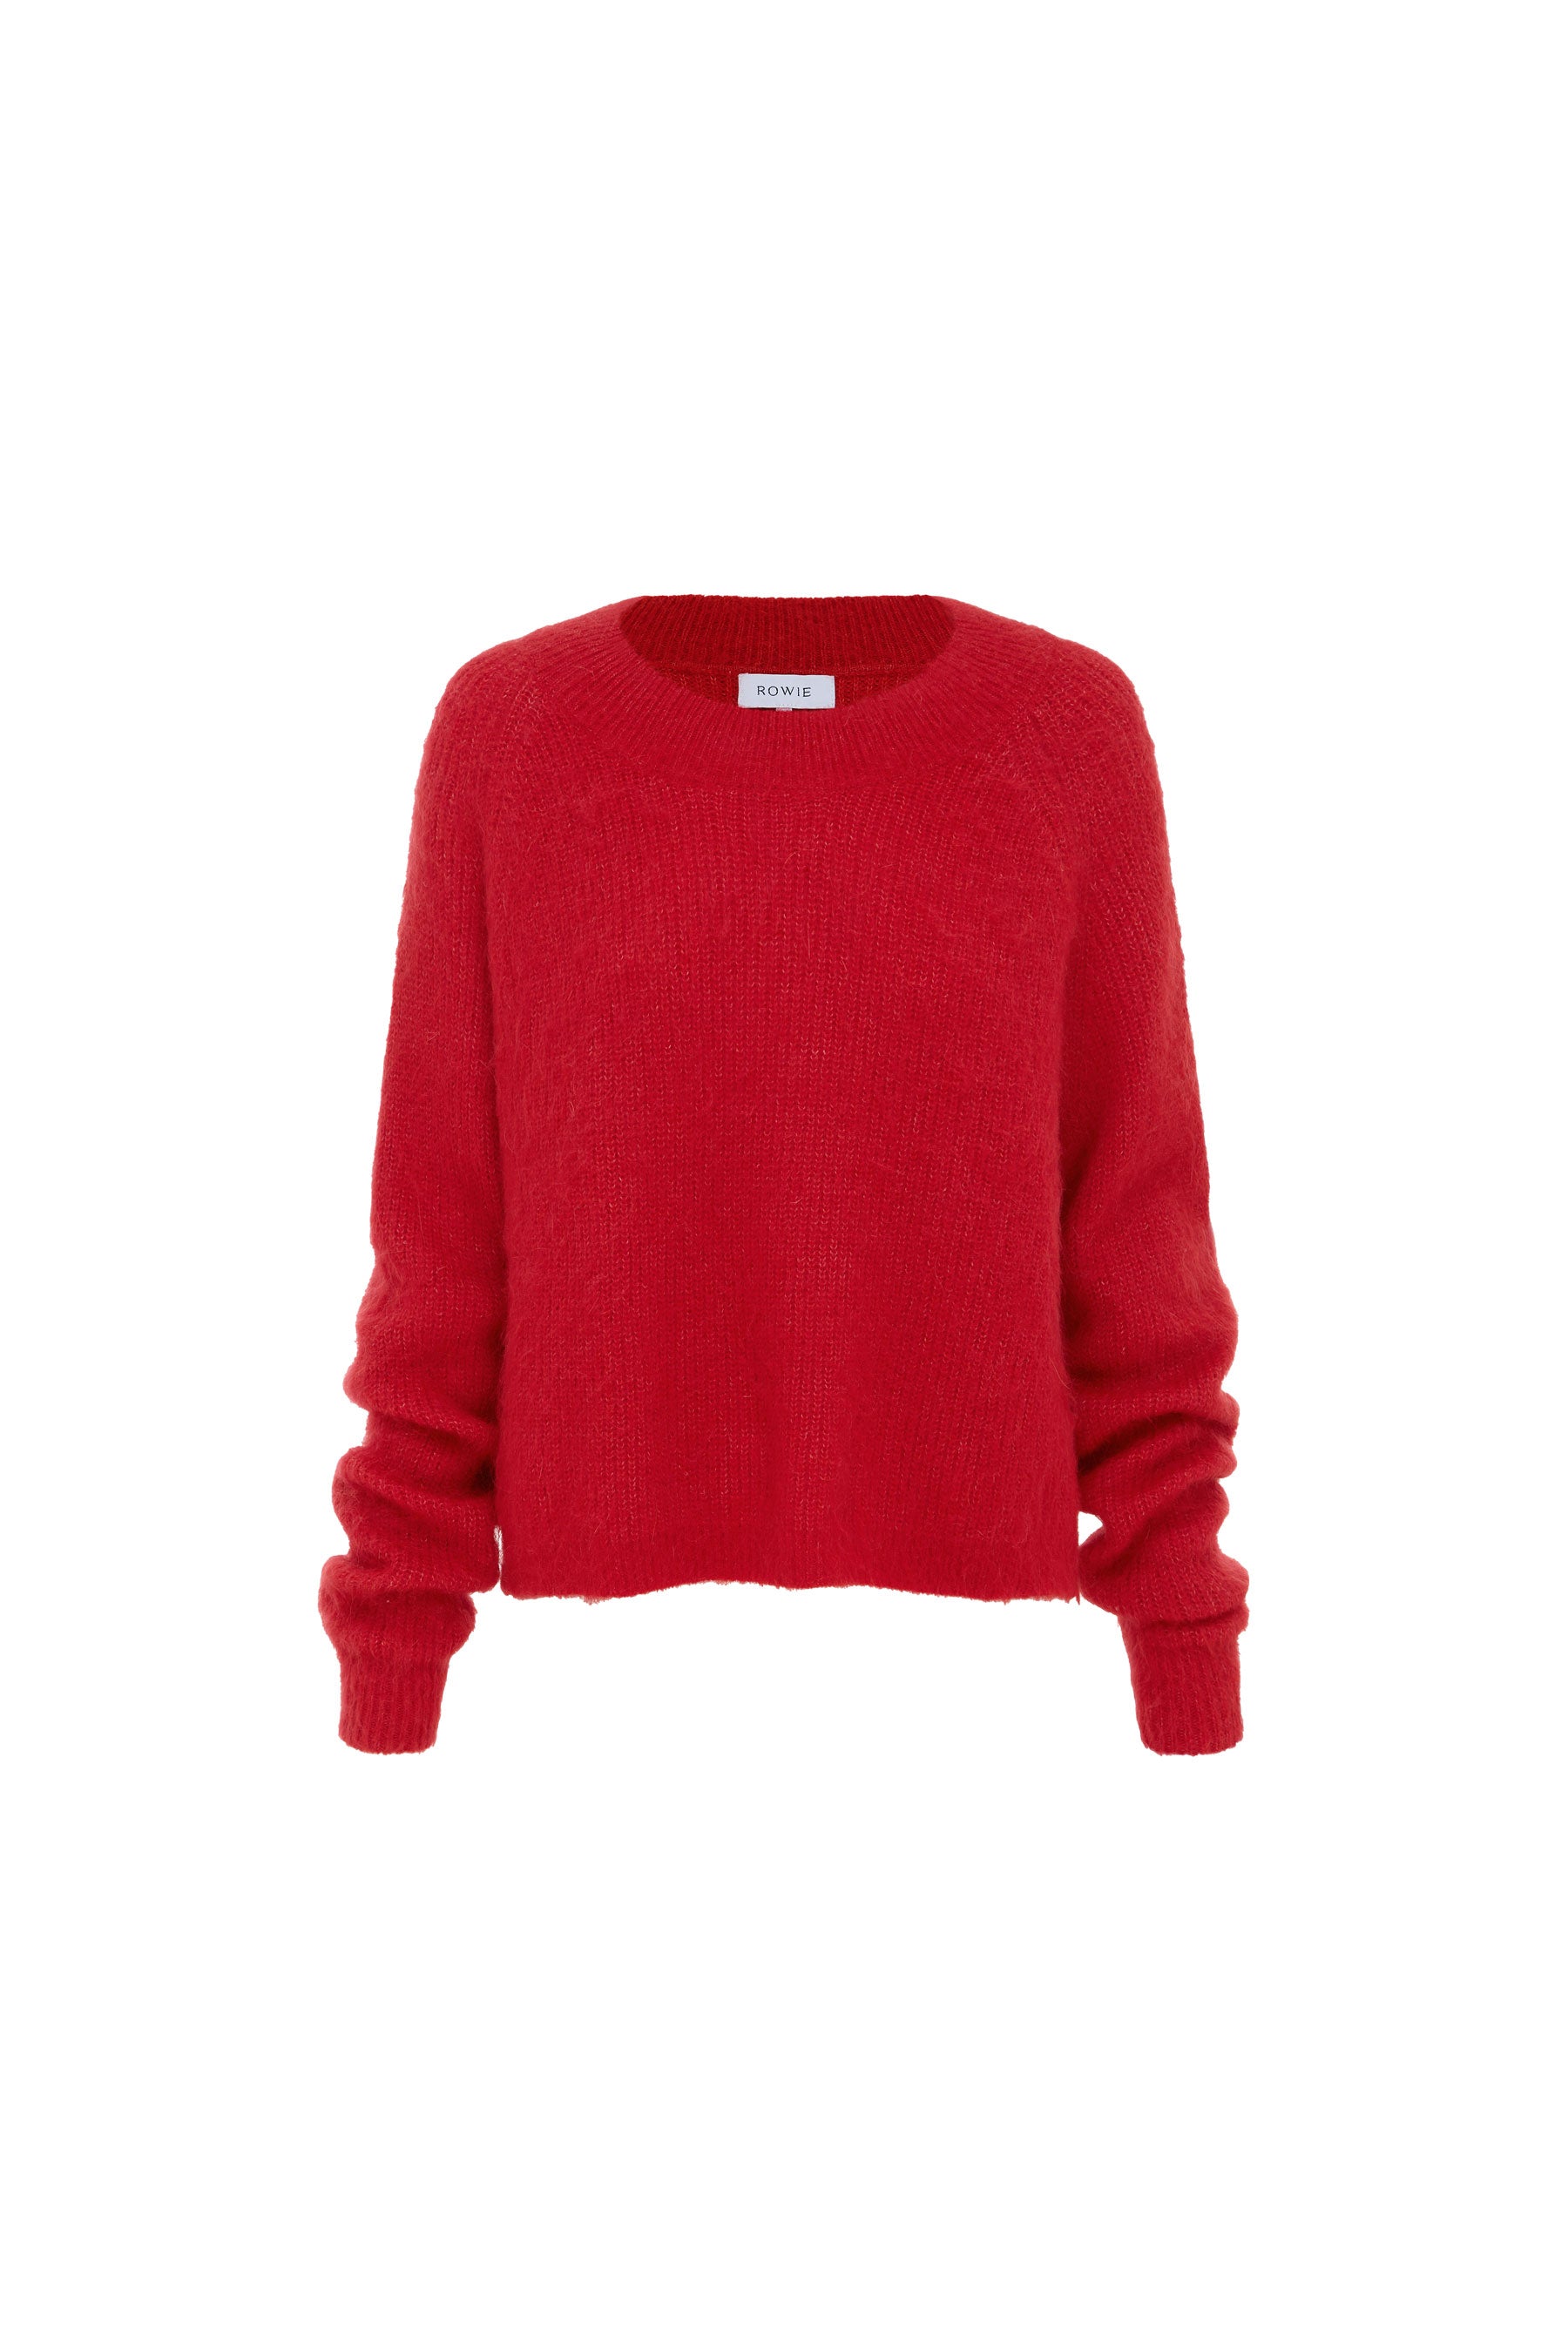 Ester Knit // Cherry Red